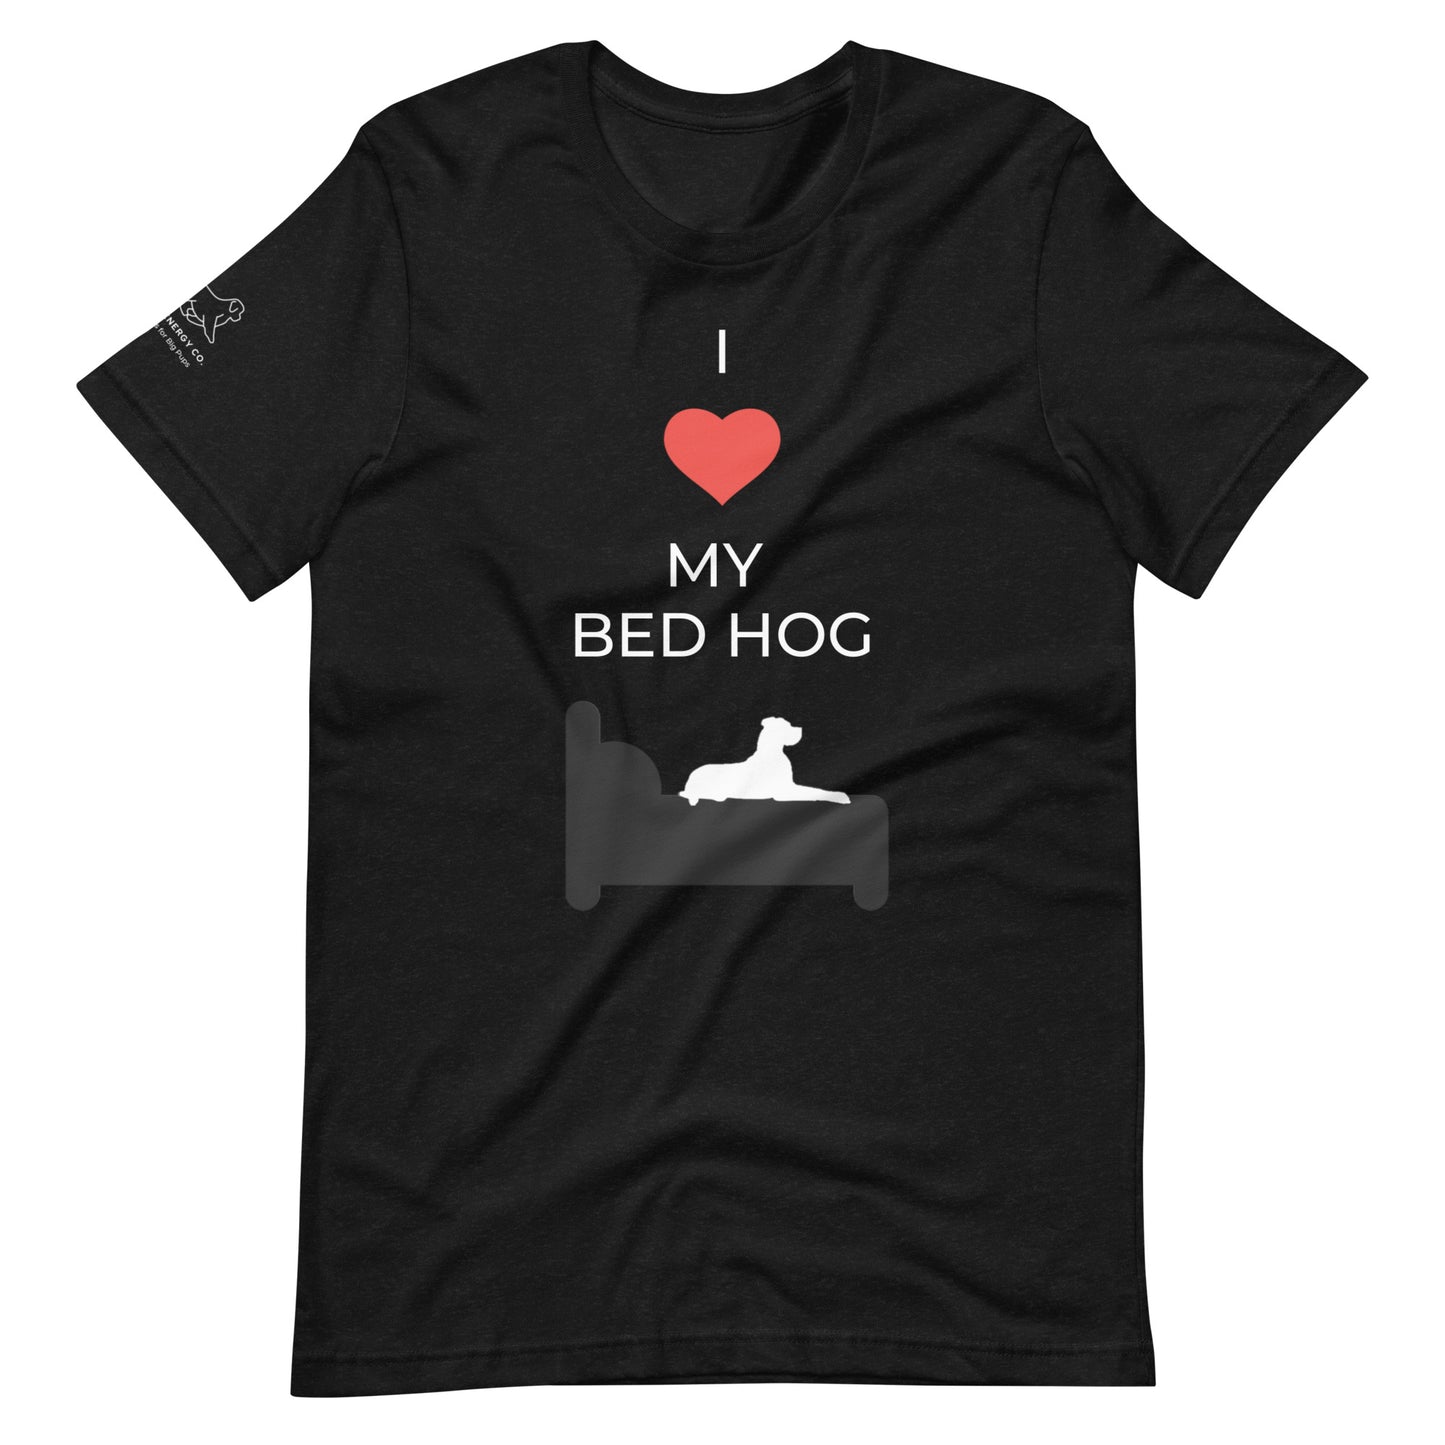 Front of a black t-shirt that reads "I love my bed hog" in white text over an illustration that is the white silhouette of a large dog laying on the gray silhouette of a bed. The word "love" is symbolized by a red heart.